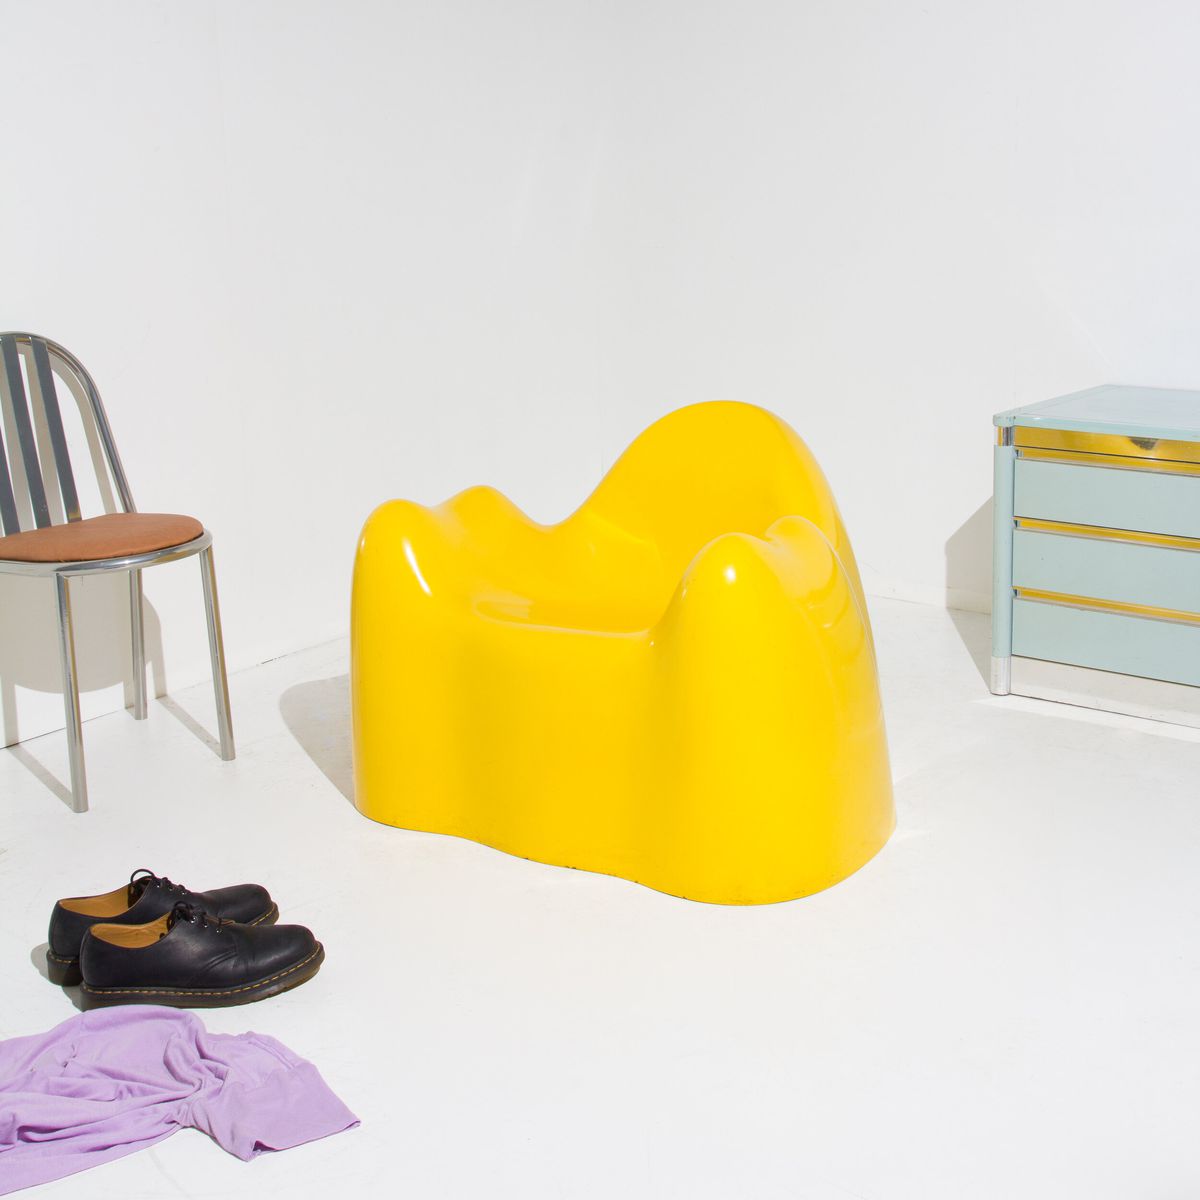 A molded plastic yellow chair